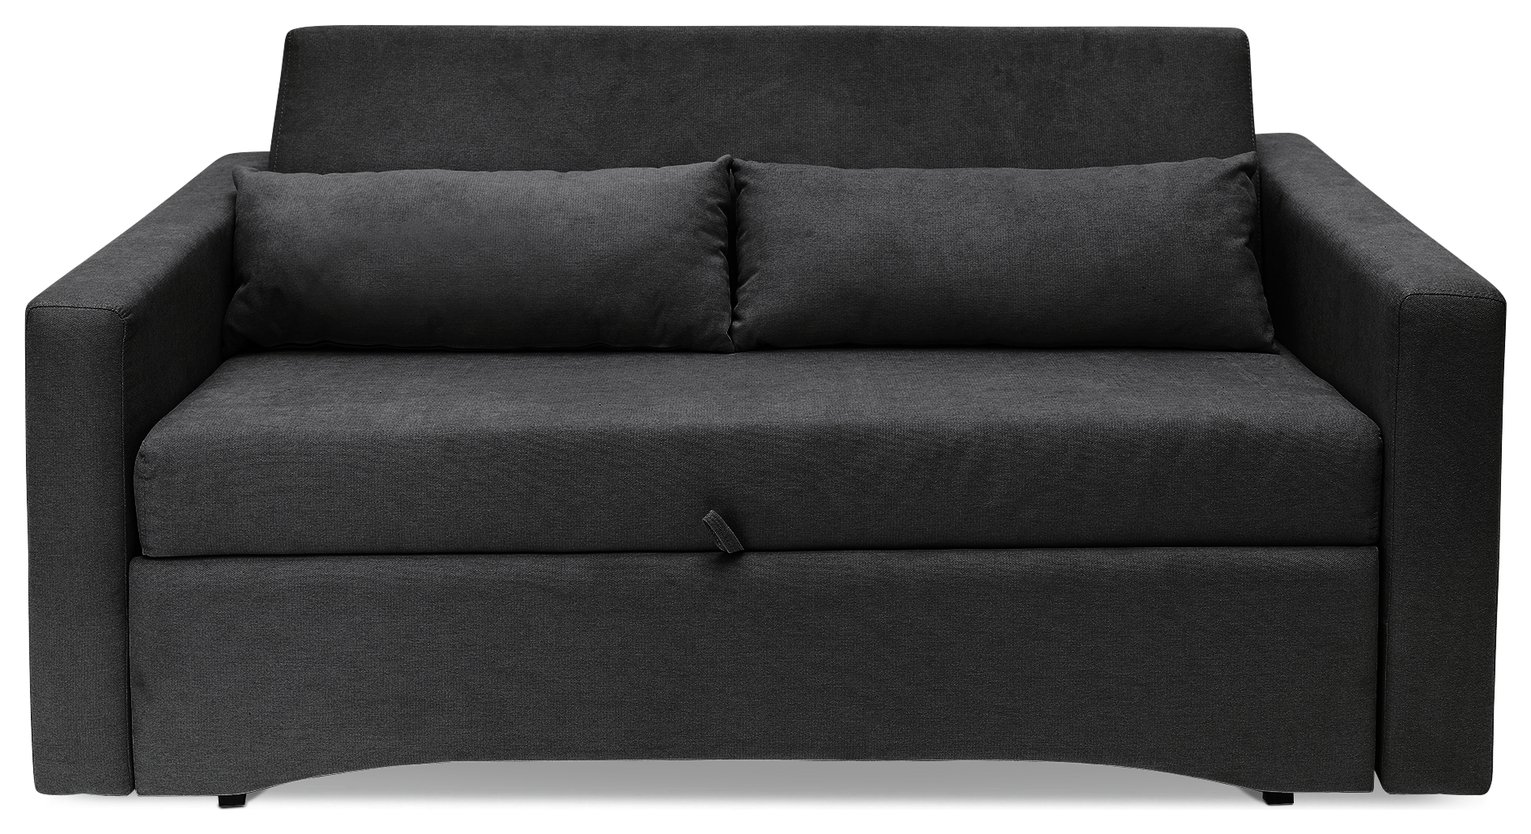 sofa and bed two in one